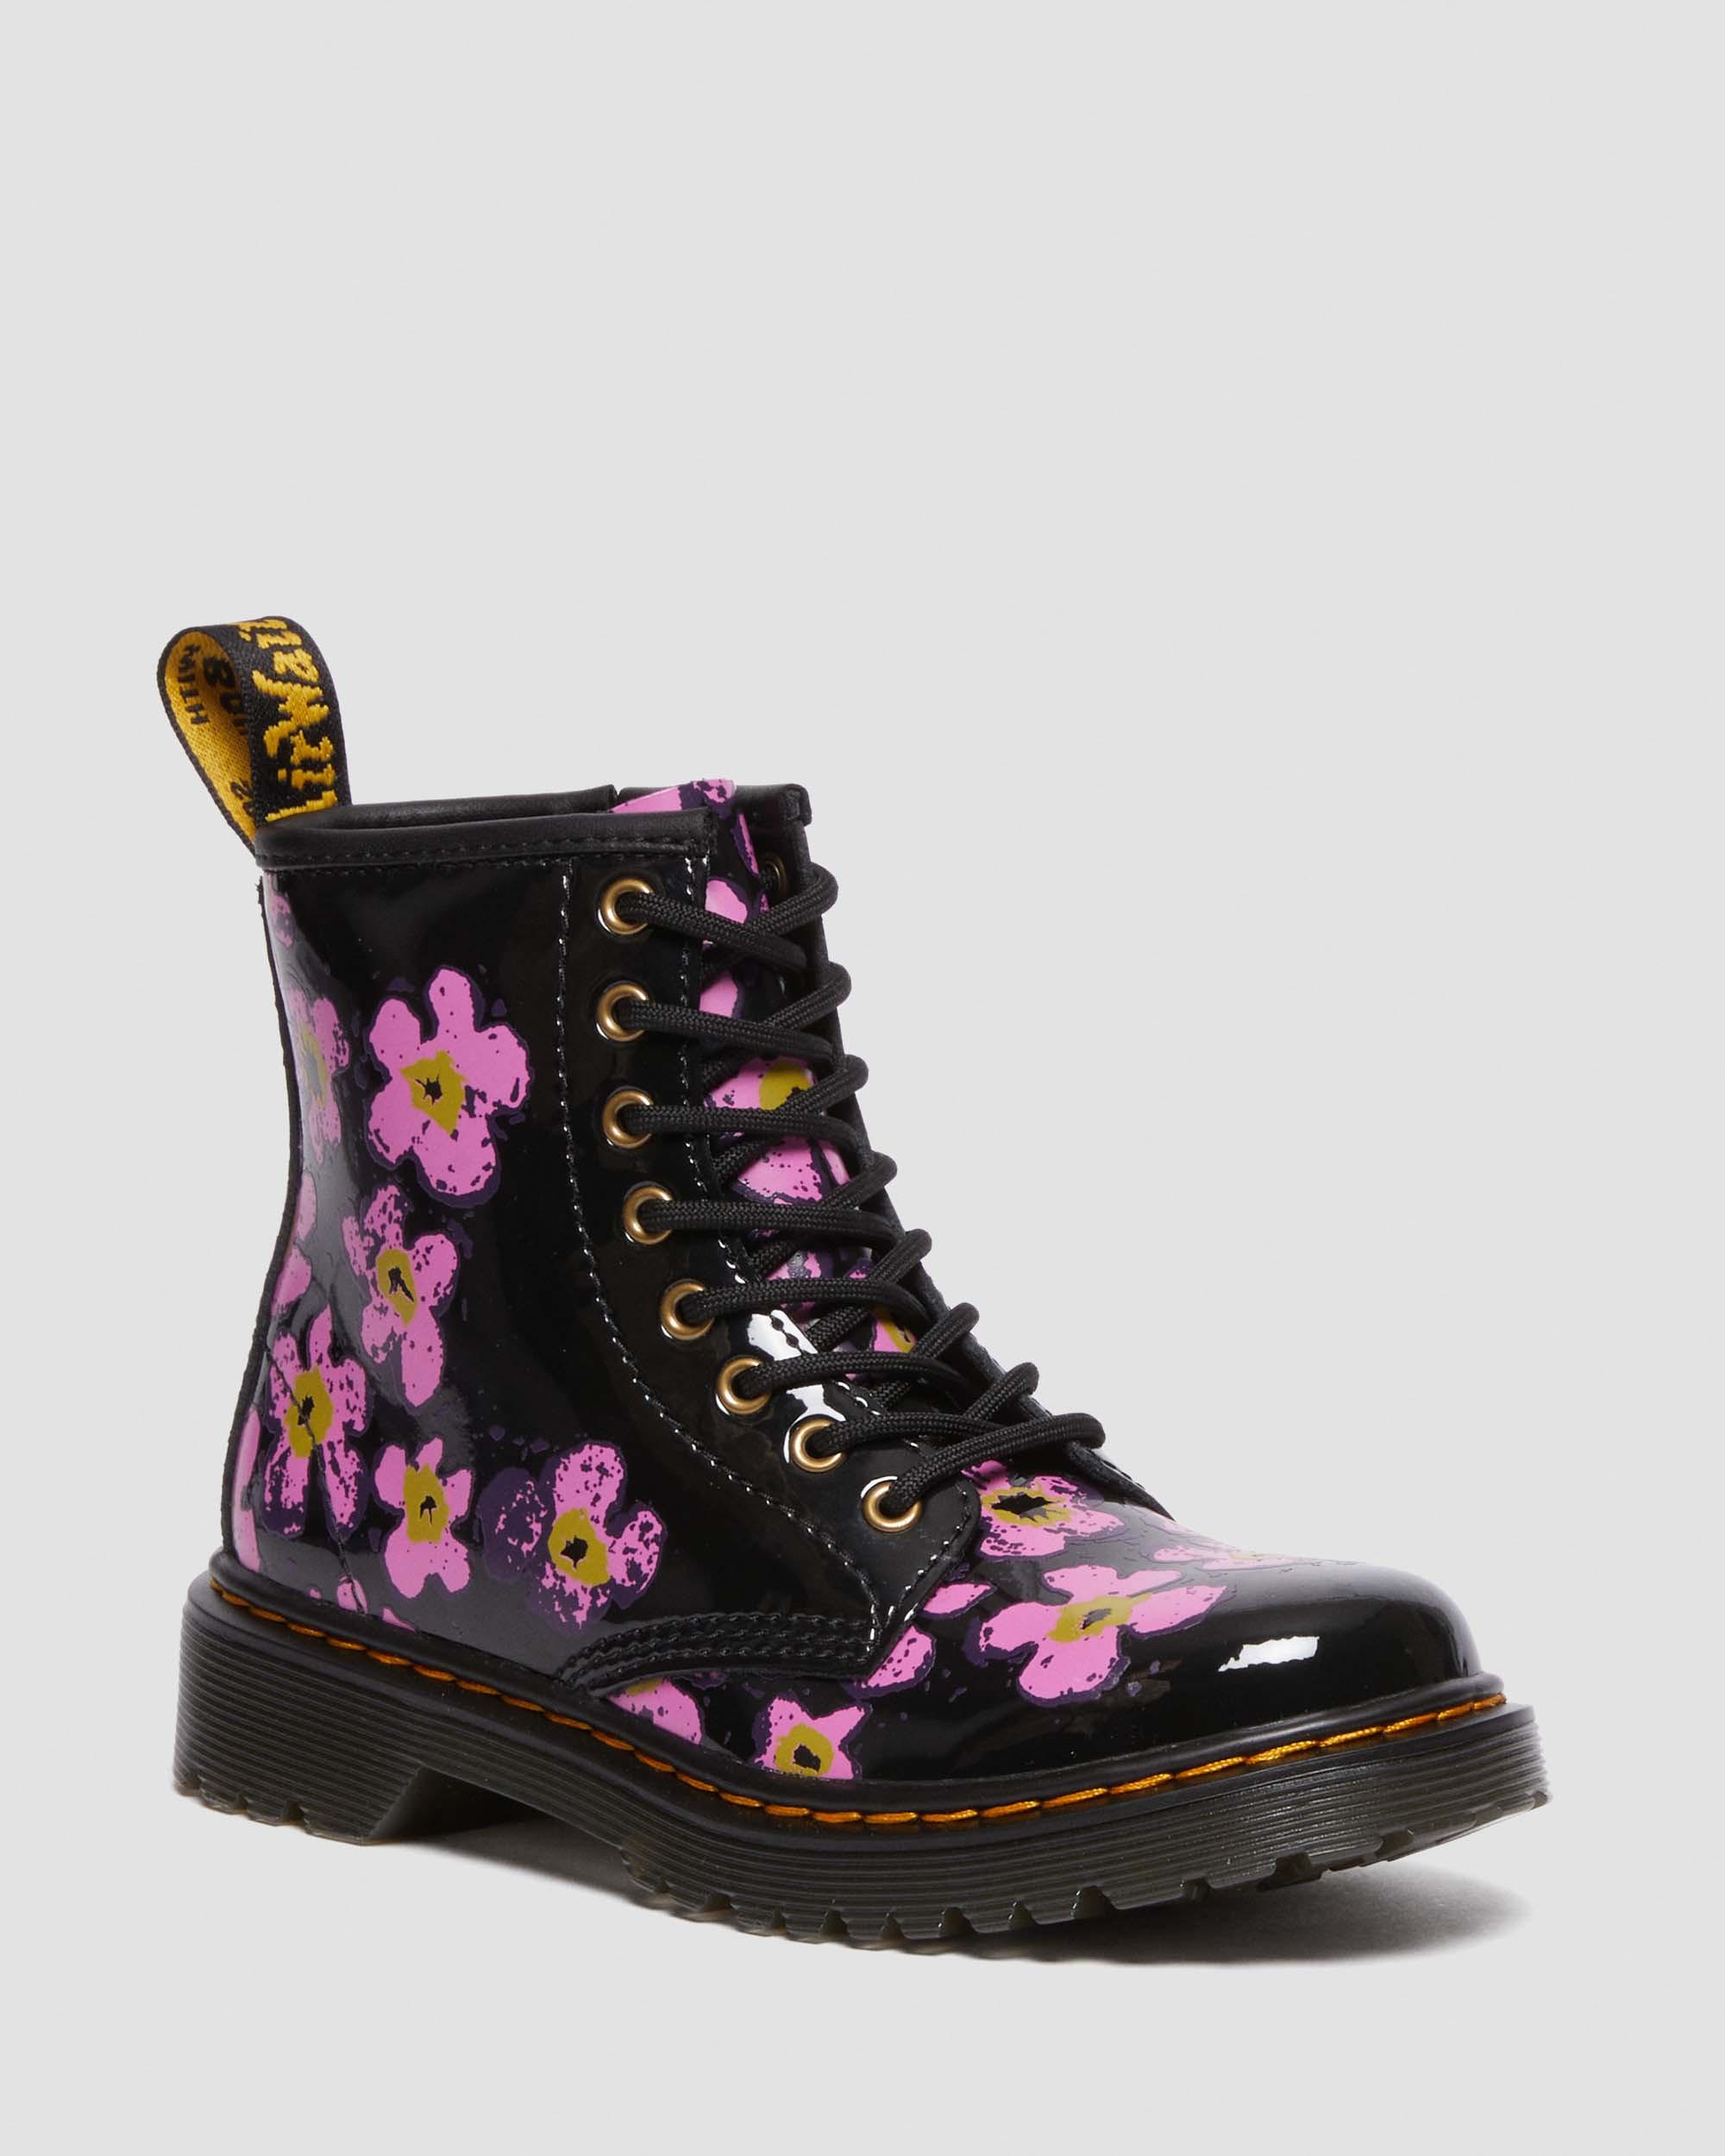 Junior 1460 Pansy Patent Leather Lace Up Boots in Black | Dr. Martens